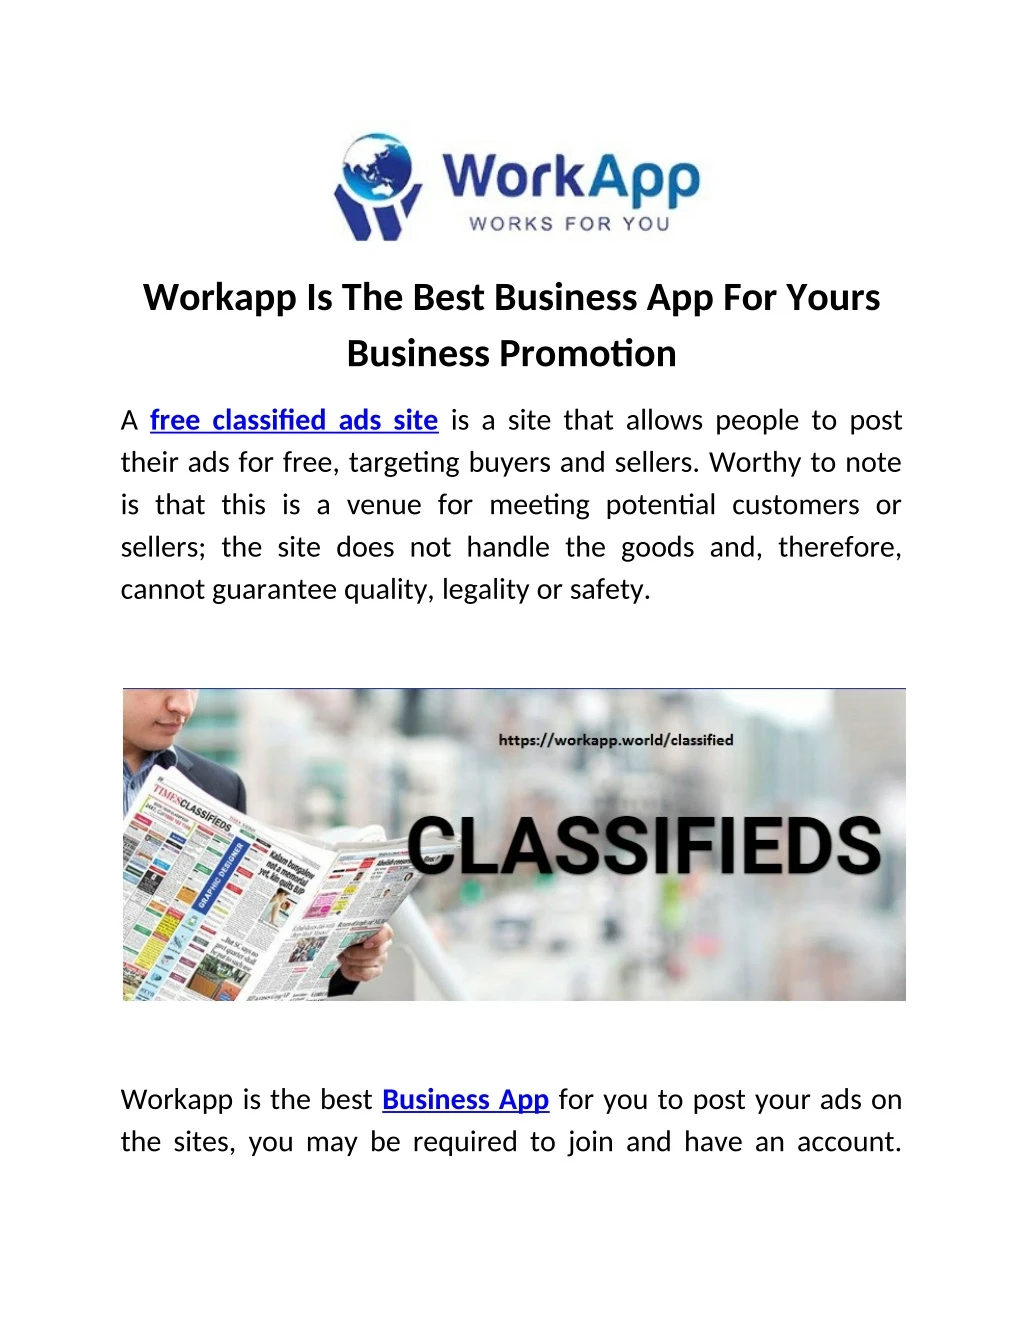 workapp is the best business app for yours